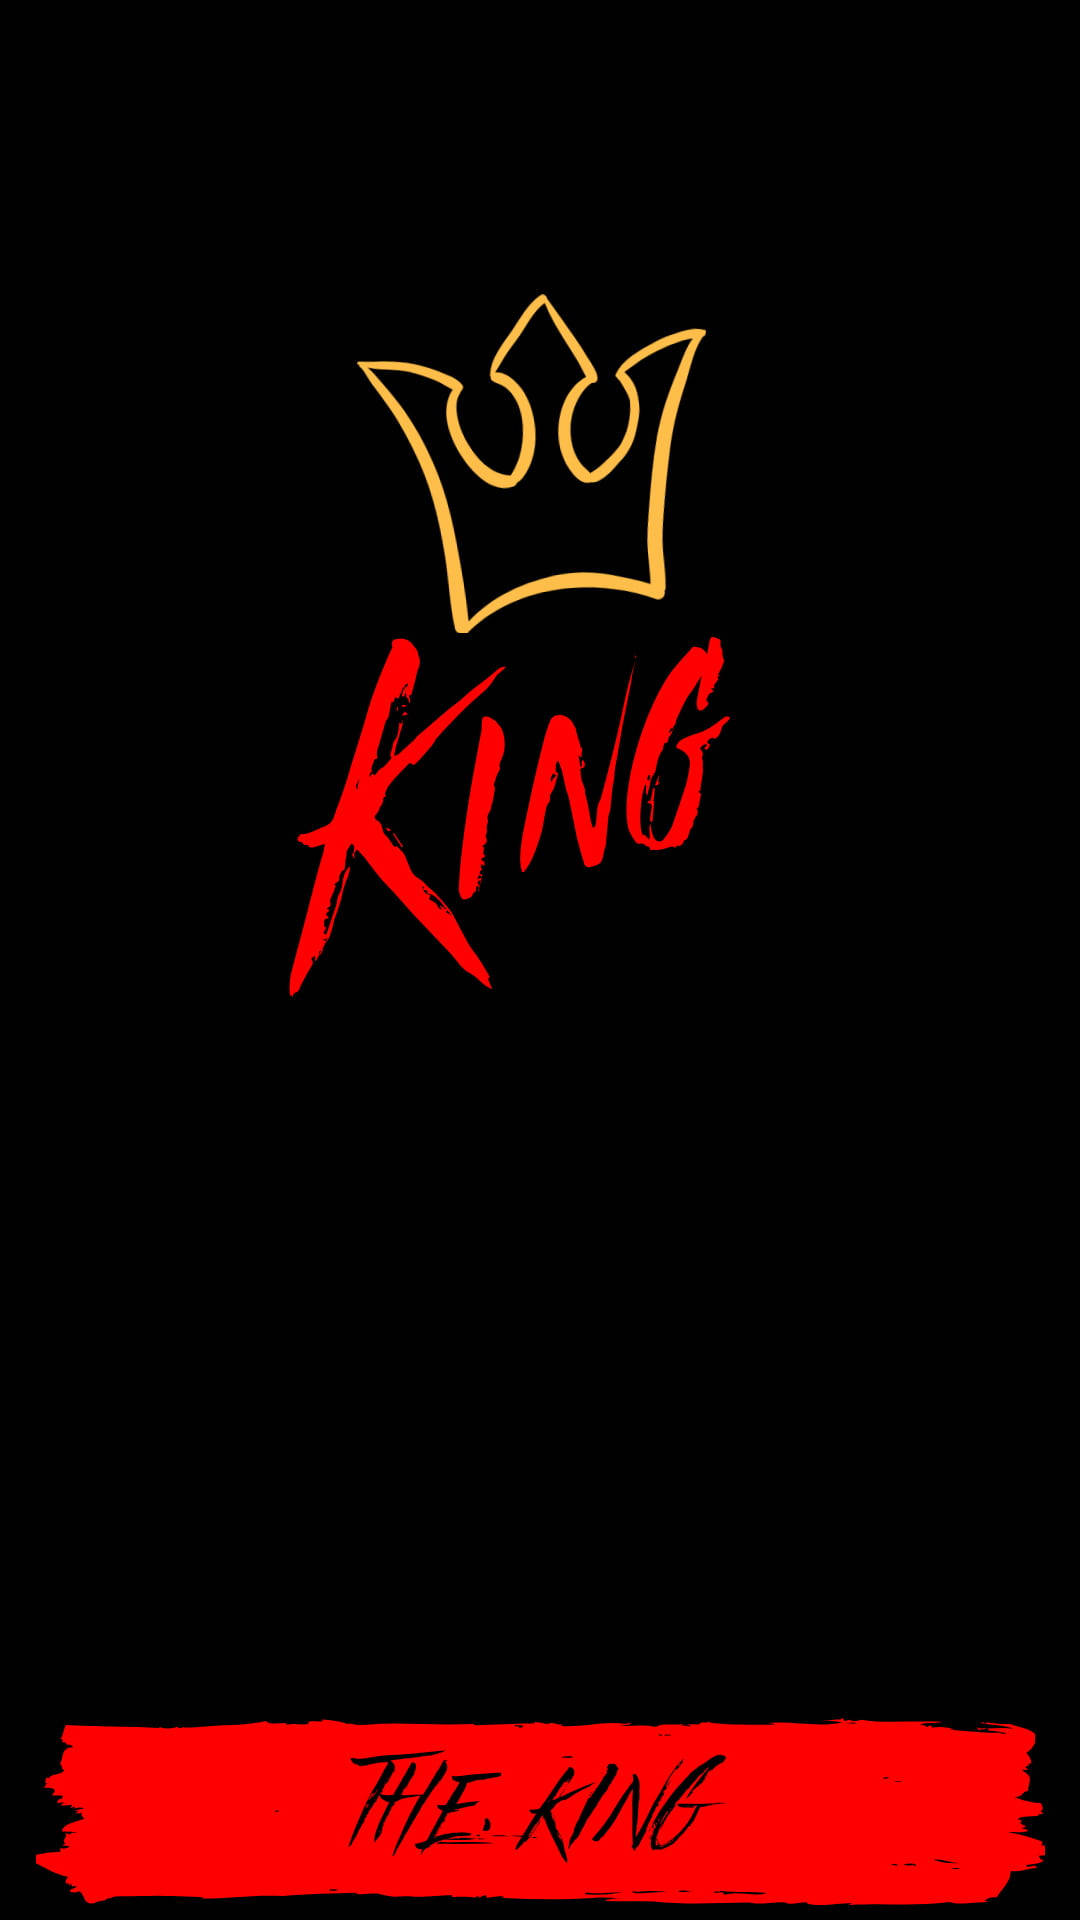 Gold And Red King Iphone Wallpaper